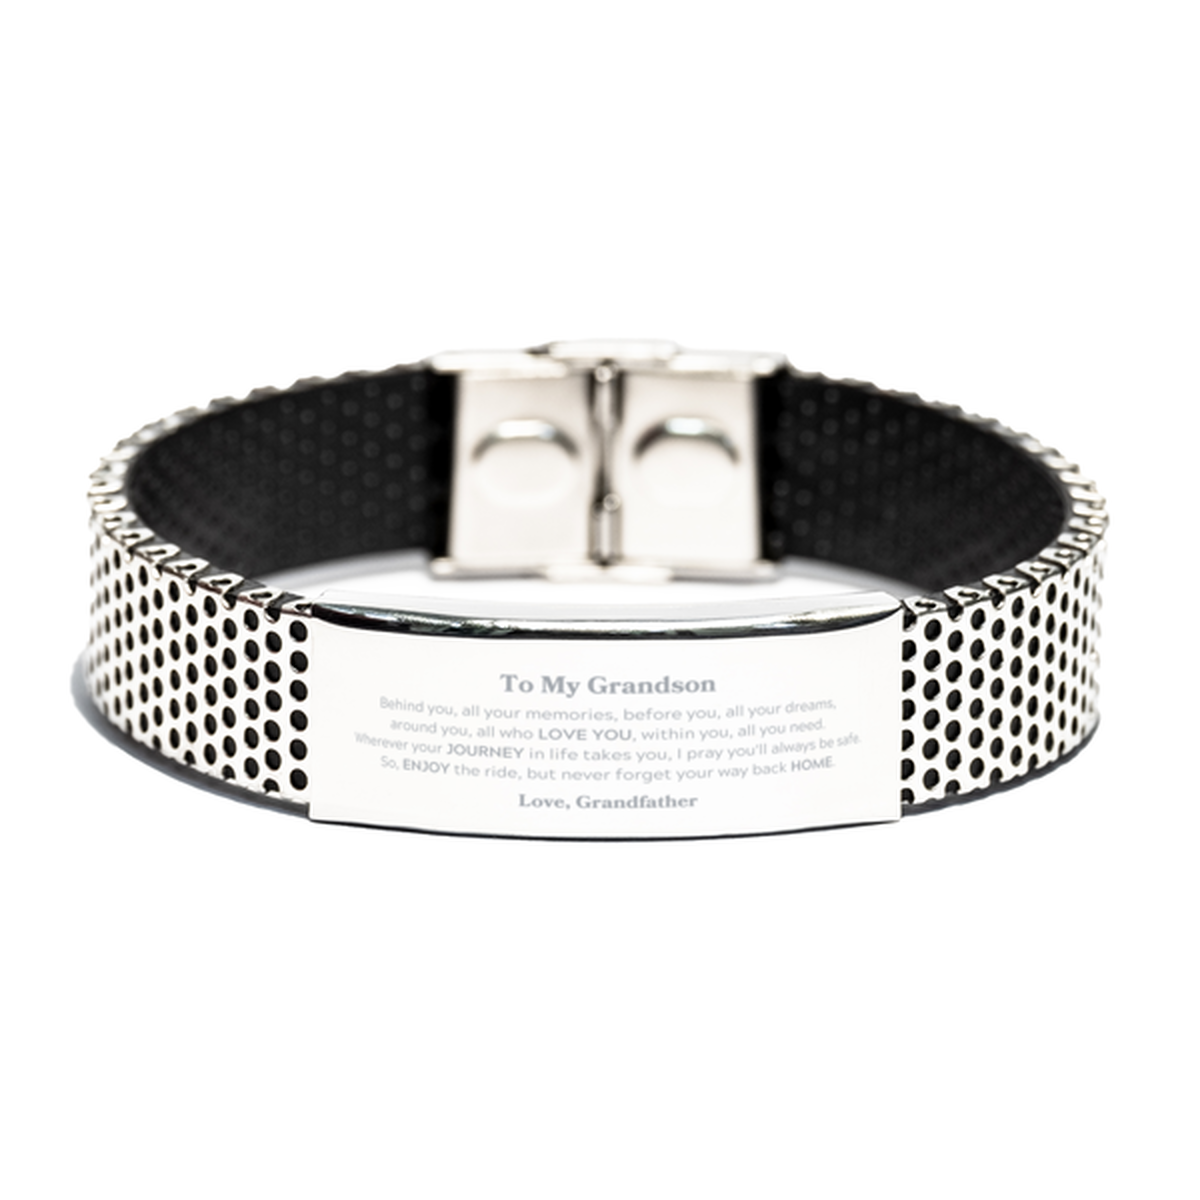 To My Grandson Graduation Gifts from Grandfather, Grandson Stainless Steel Bracelet Christmas Birthday Gifts for Grandson Behind you, all your memories, before you, all your dreams. Love, Grandfather